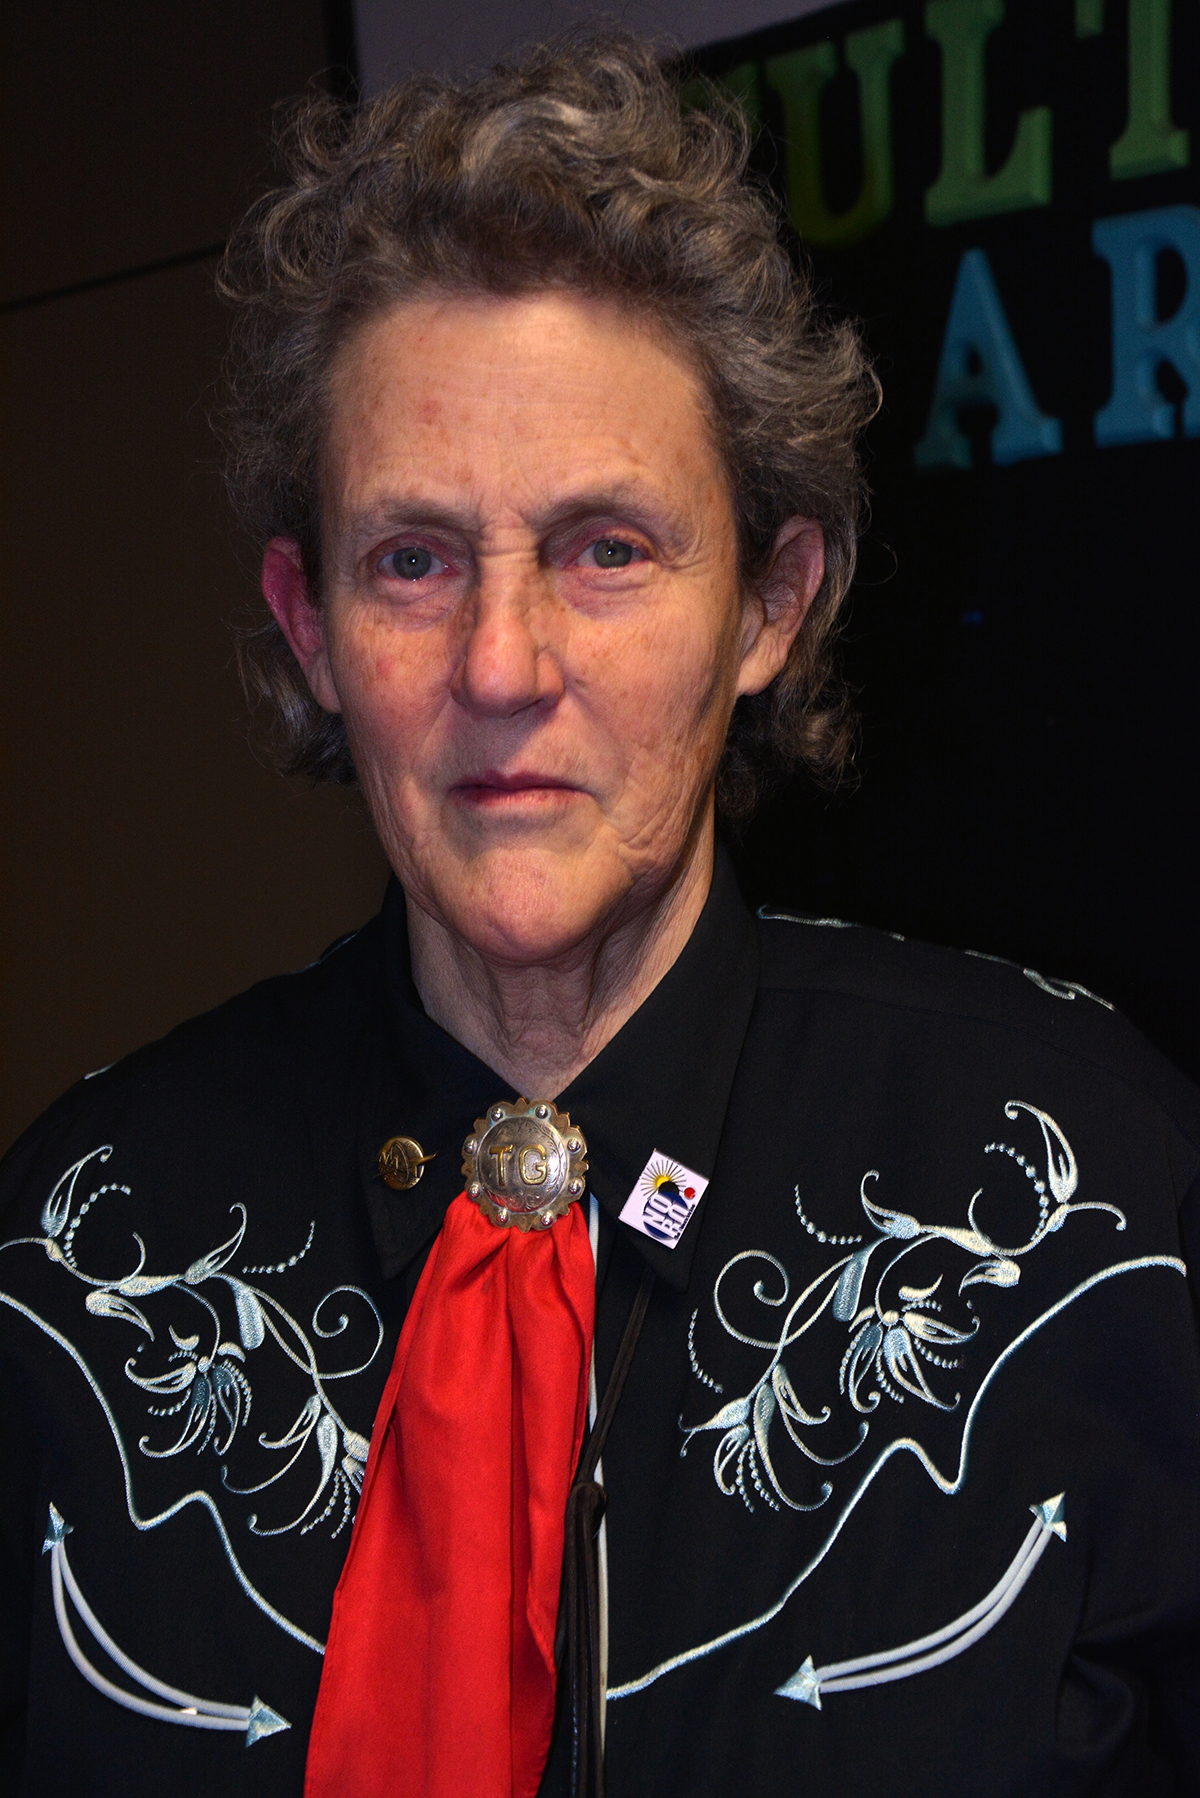 About 500 educators, mental health professionals and parents were at University of Houston-Clear Lake on Jan. 5 to hear from Temple Grandin, internationally renowned author and speaker on autism. Photo courtesy of the Office of University Communications.